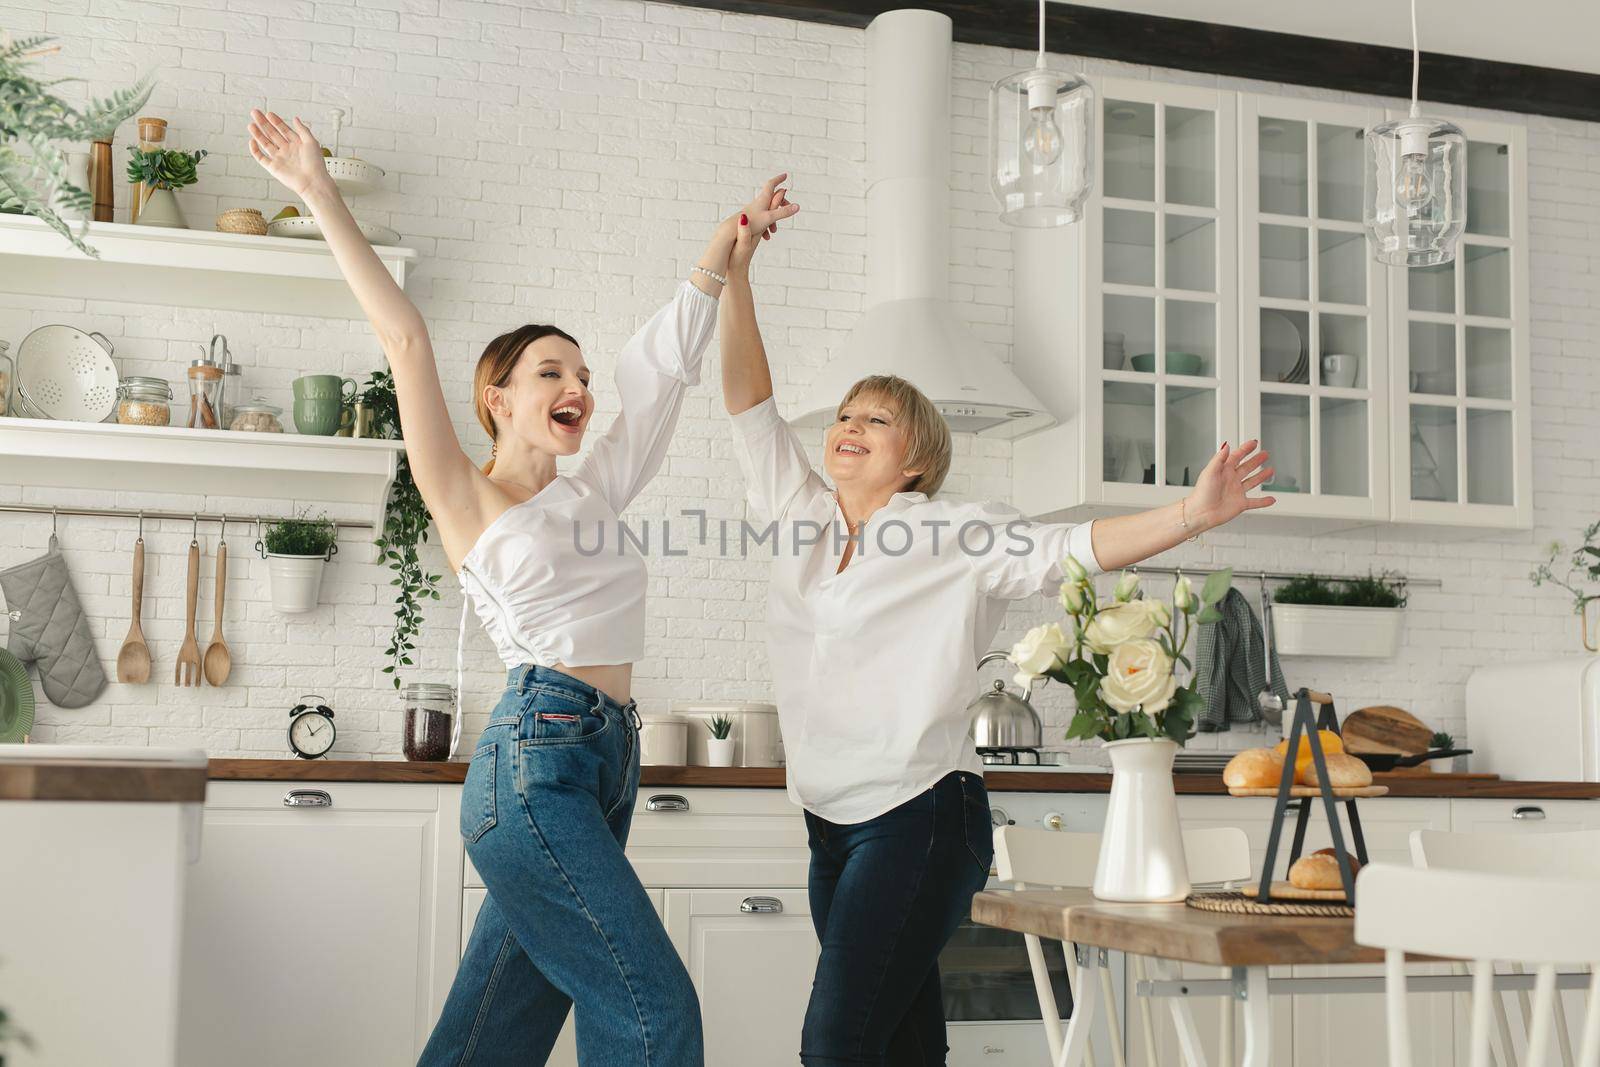 Funny elderly mother is having fun in the kitchen with an adult daughter, they cook dinner and sing together while holding kitchen utensils.